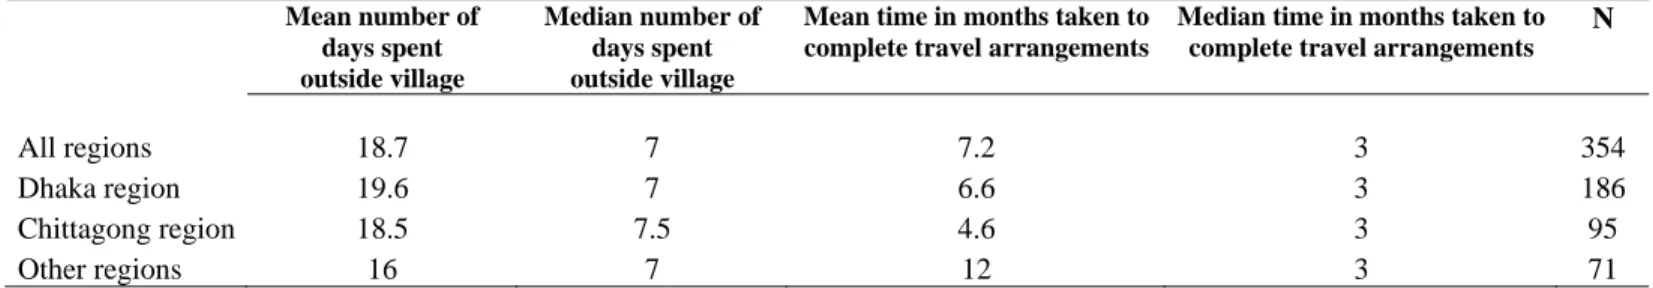 Table 7: Number of days and months spent out of the village to process employment contract and travel  arrangements   Mean number of  days spent   outside village Median number of days spent outside village